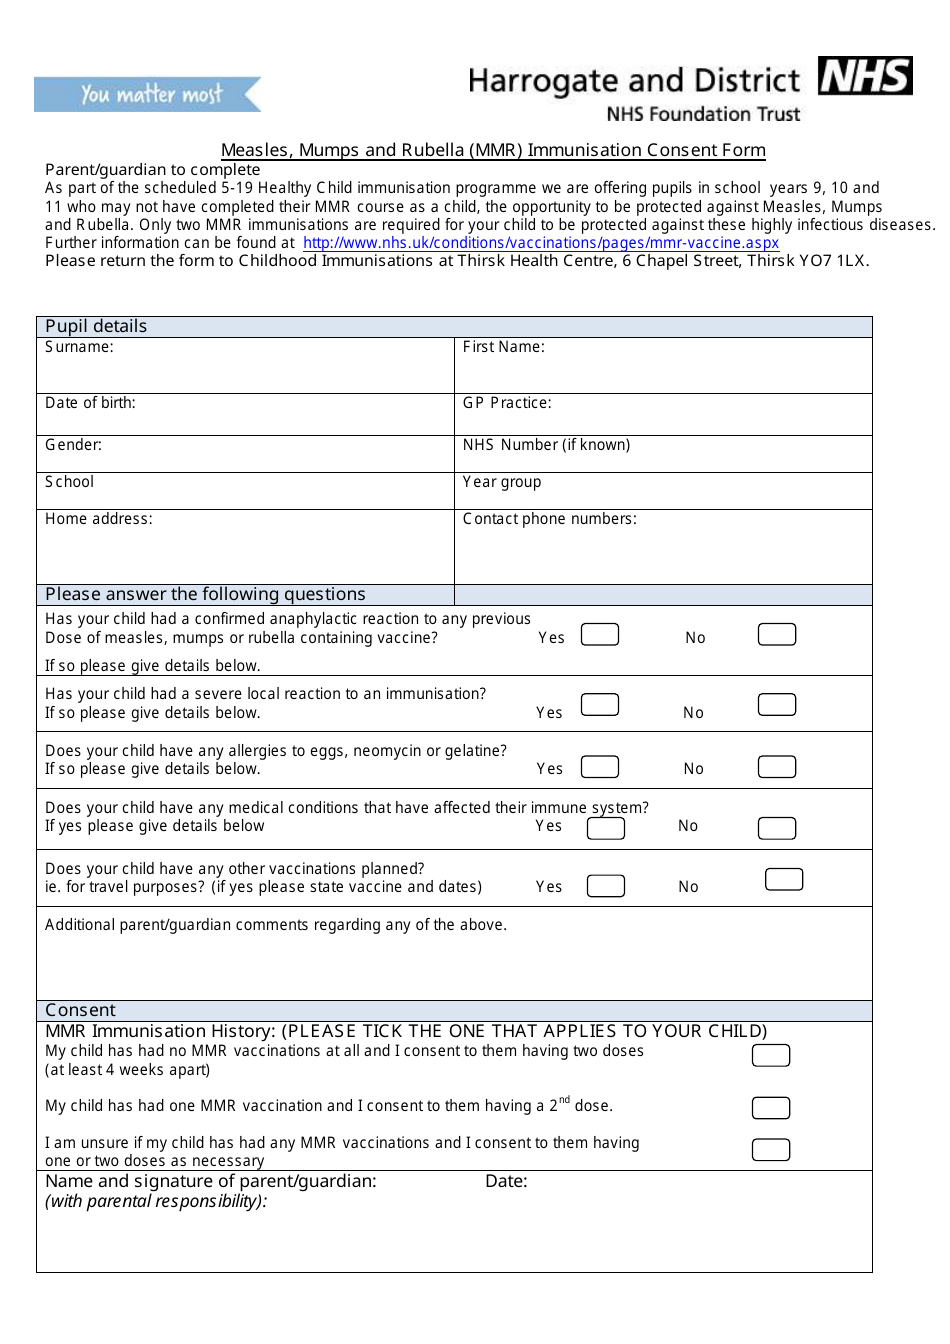 Measles, Mumps and Rubella (Mmr) Immunisation Consent Form - United Kingdom, Page 1